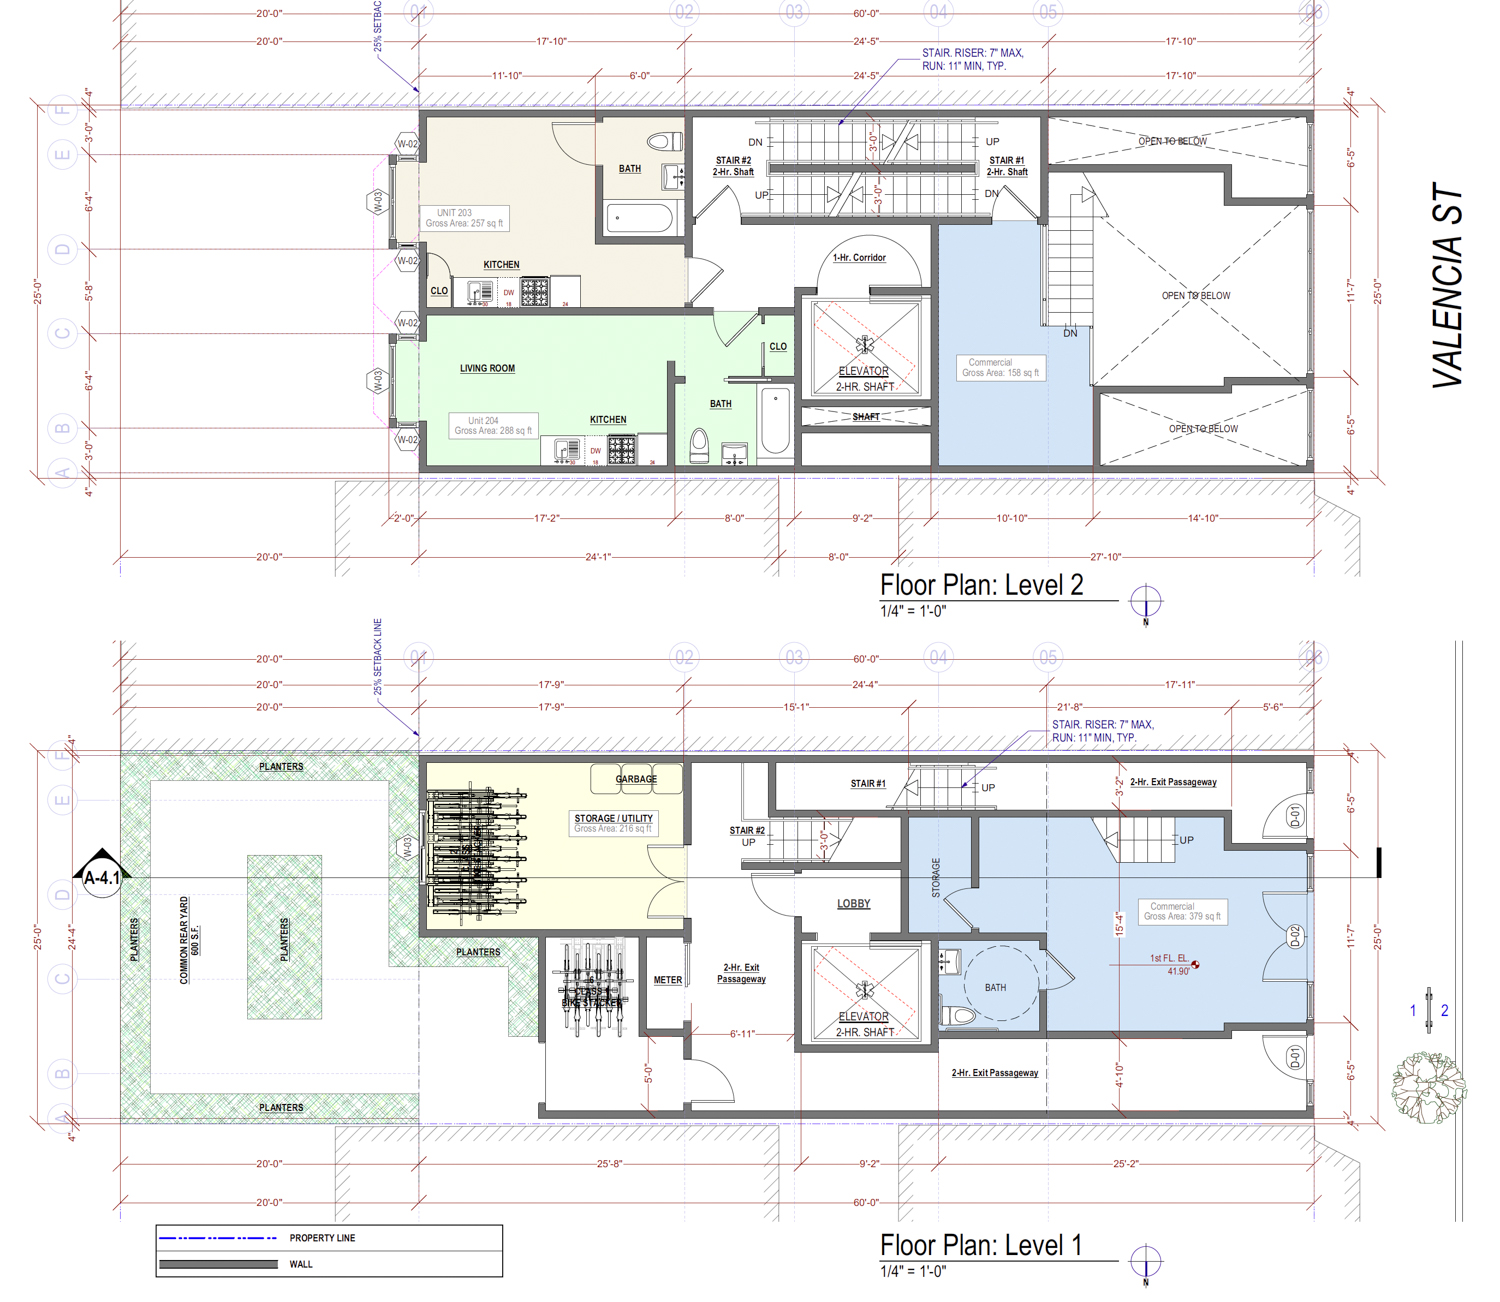 811 Valencia Street floor plan, design by SIA Consulting